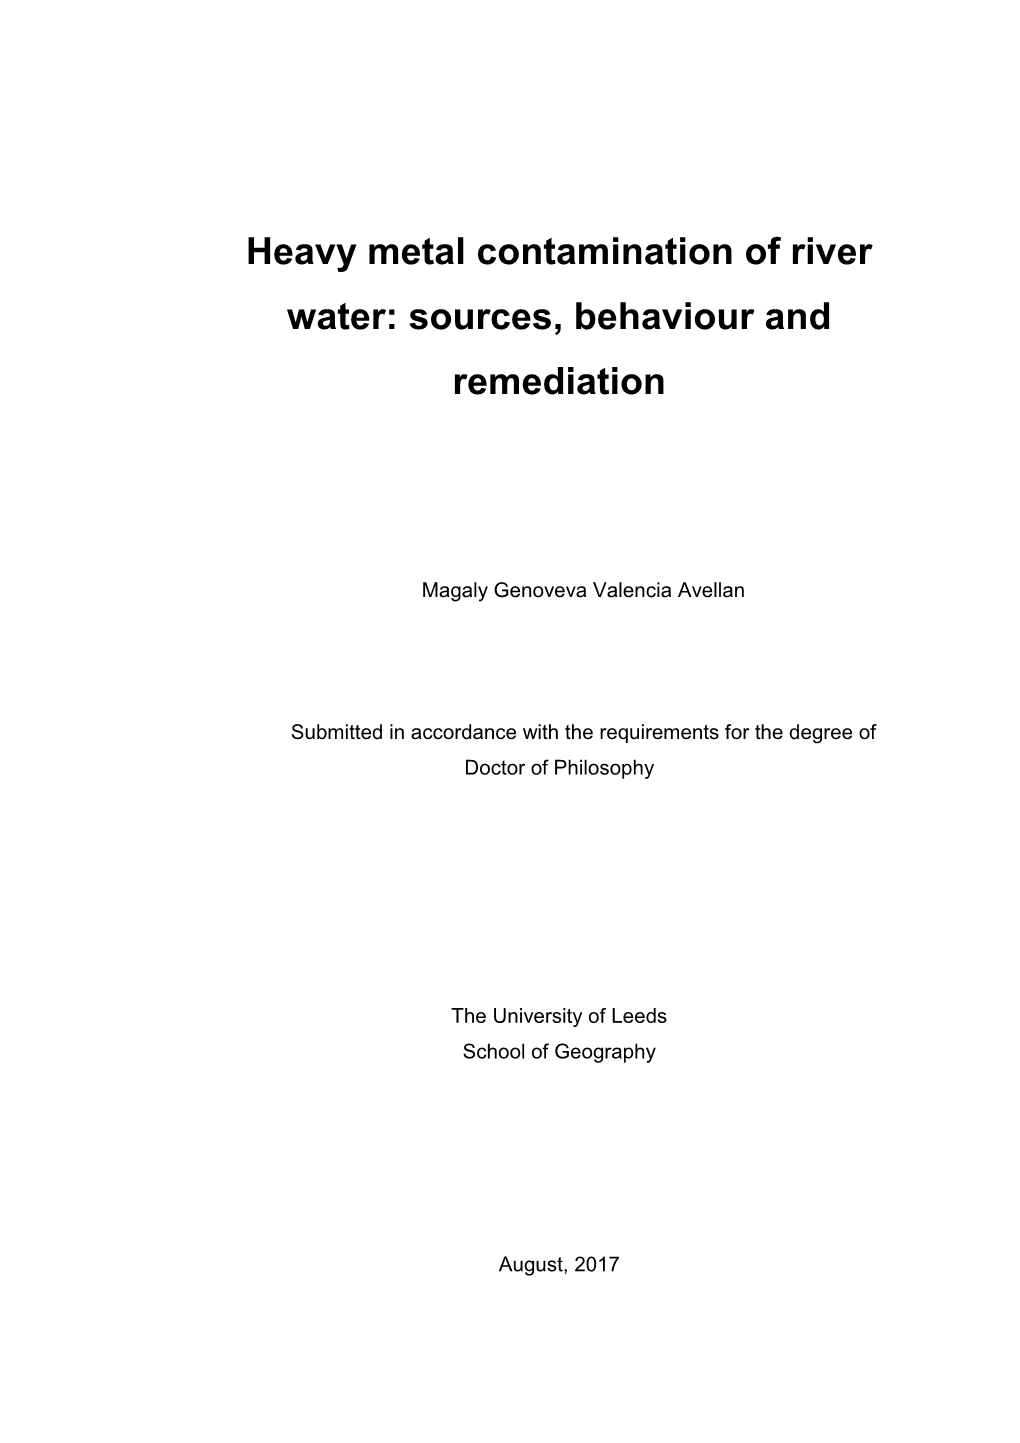 Heavy Metal Contamination of River Water: Sources, Behaviour and Remediation